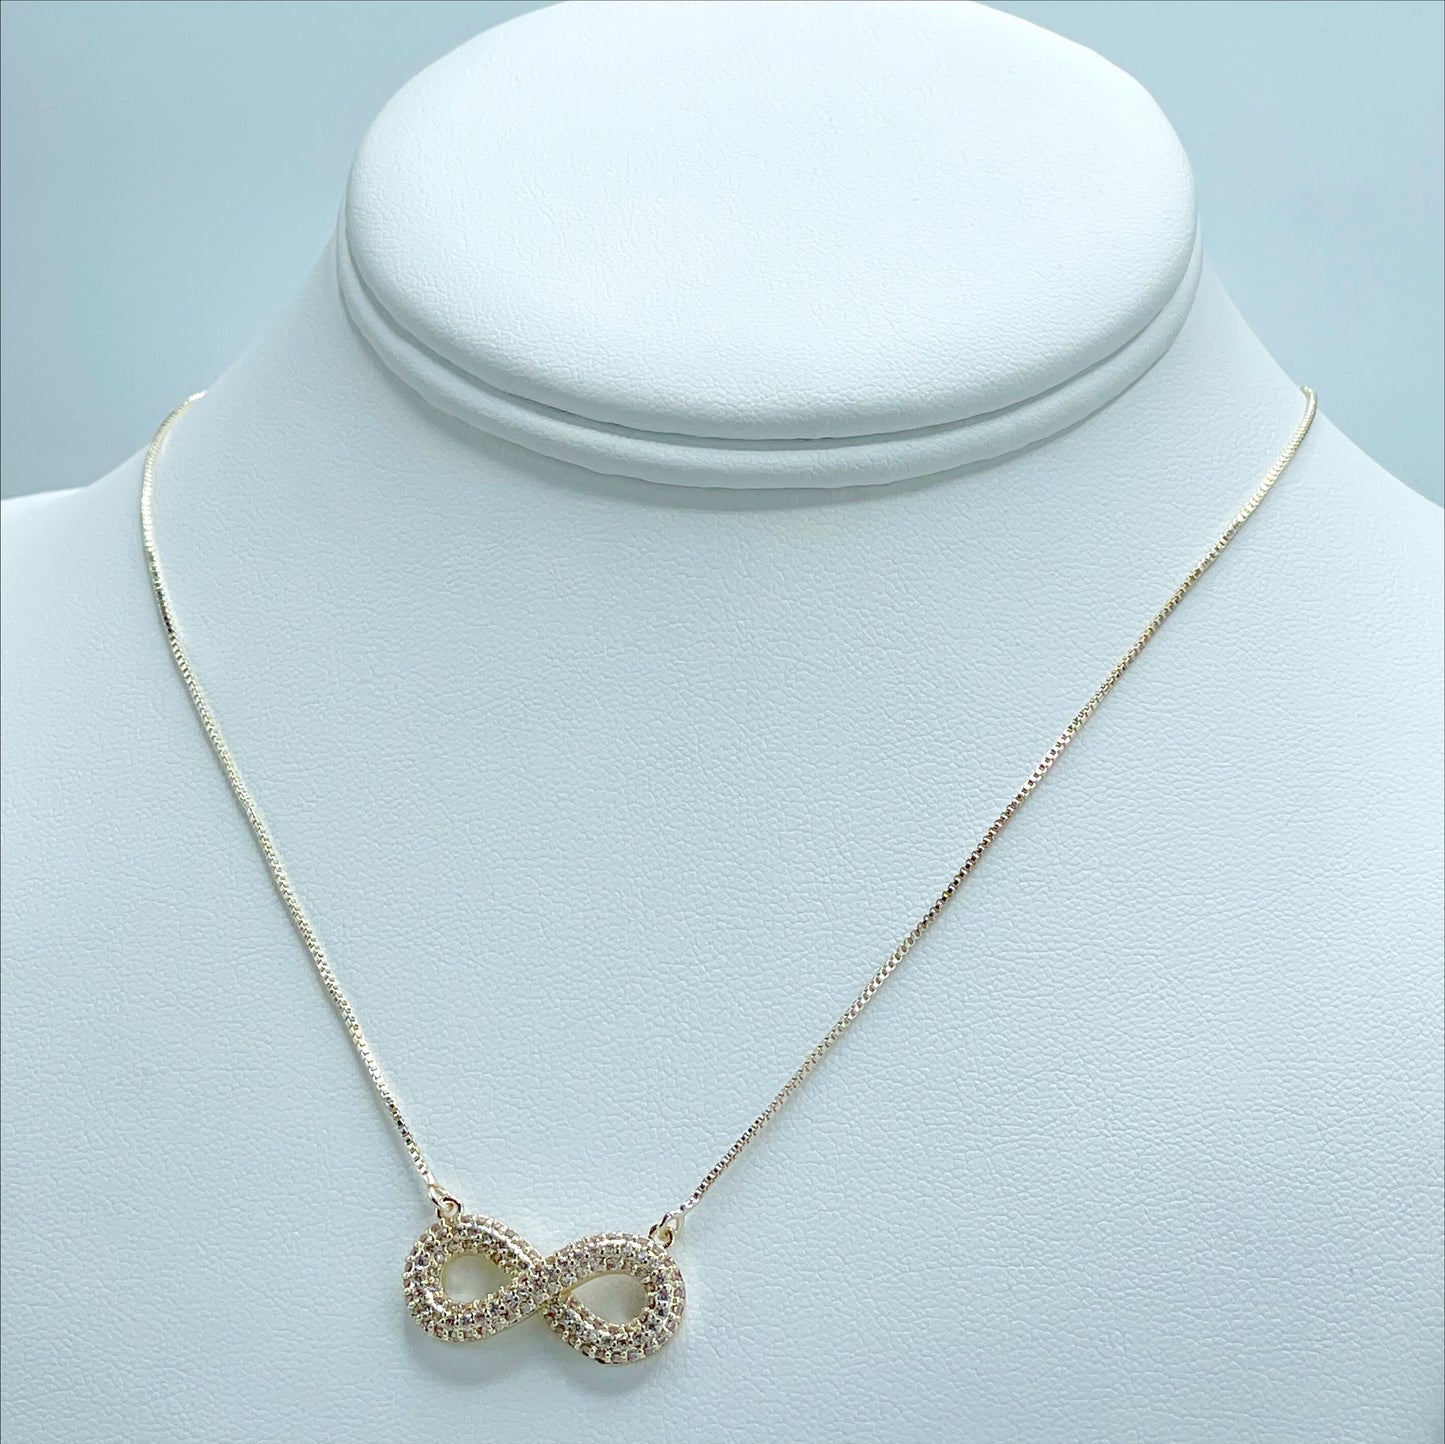 18k Gold Filled 1mm Box Chain with Clear Micro Cubic Zirconia Infinity Sign Charm Necklace and Earrings Set, Wholesale Jewelry Supplies